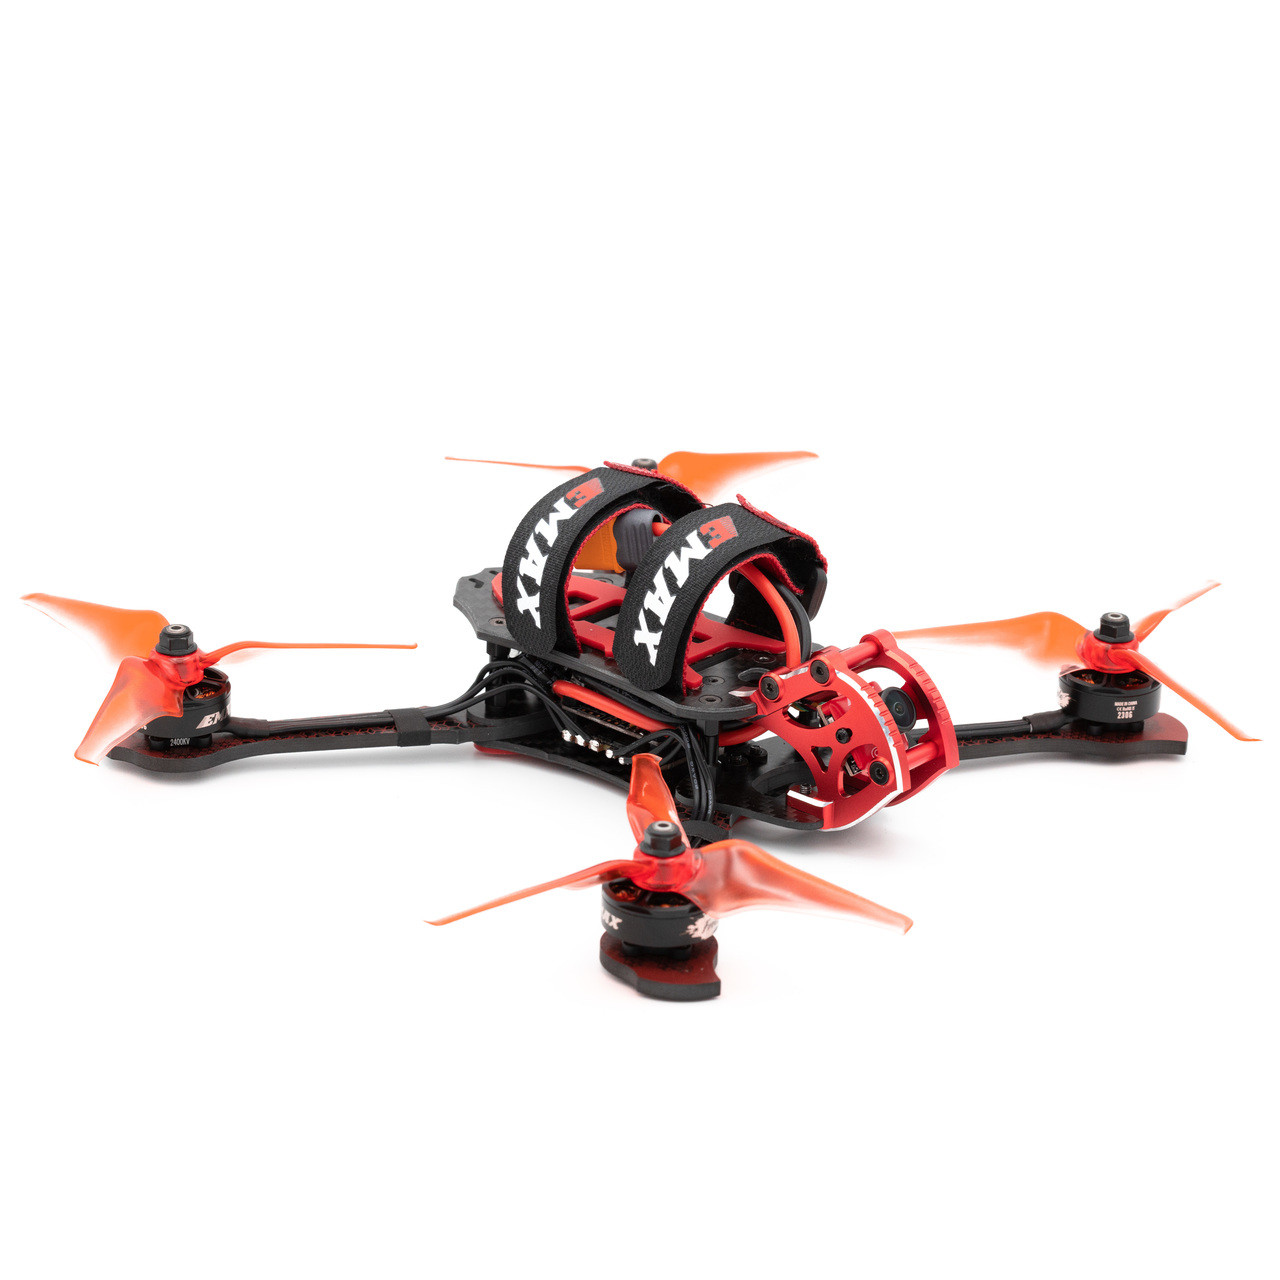 EMAX Freestyle Motor 2306 for BUZZ 5 inch 4s-6s Performance FPV Quad Racing